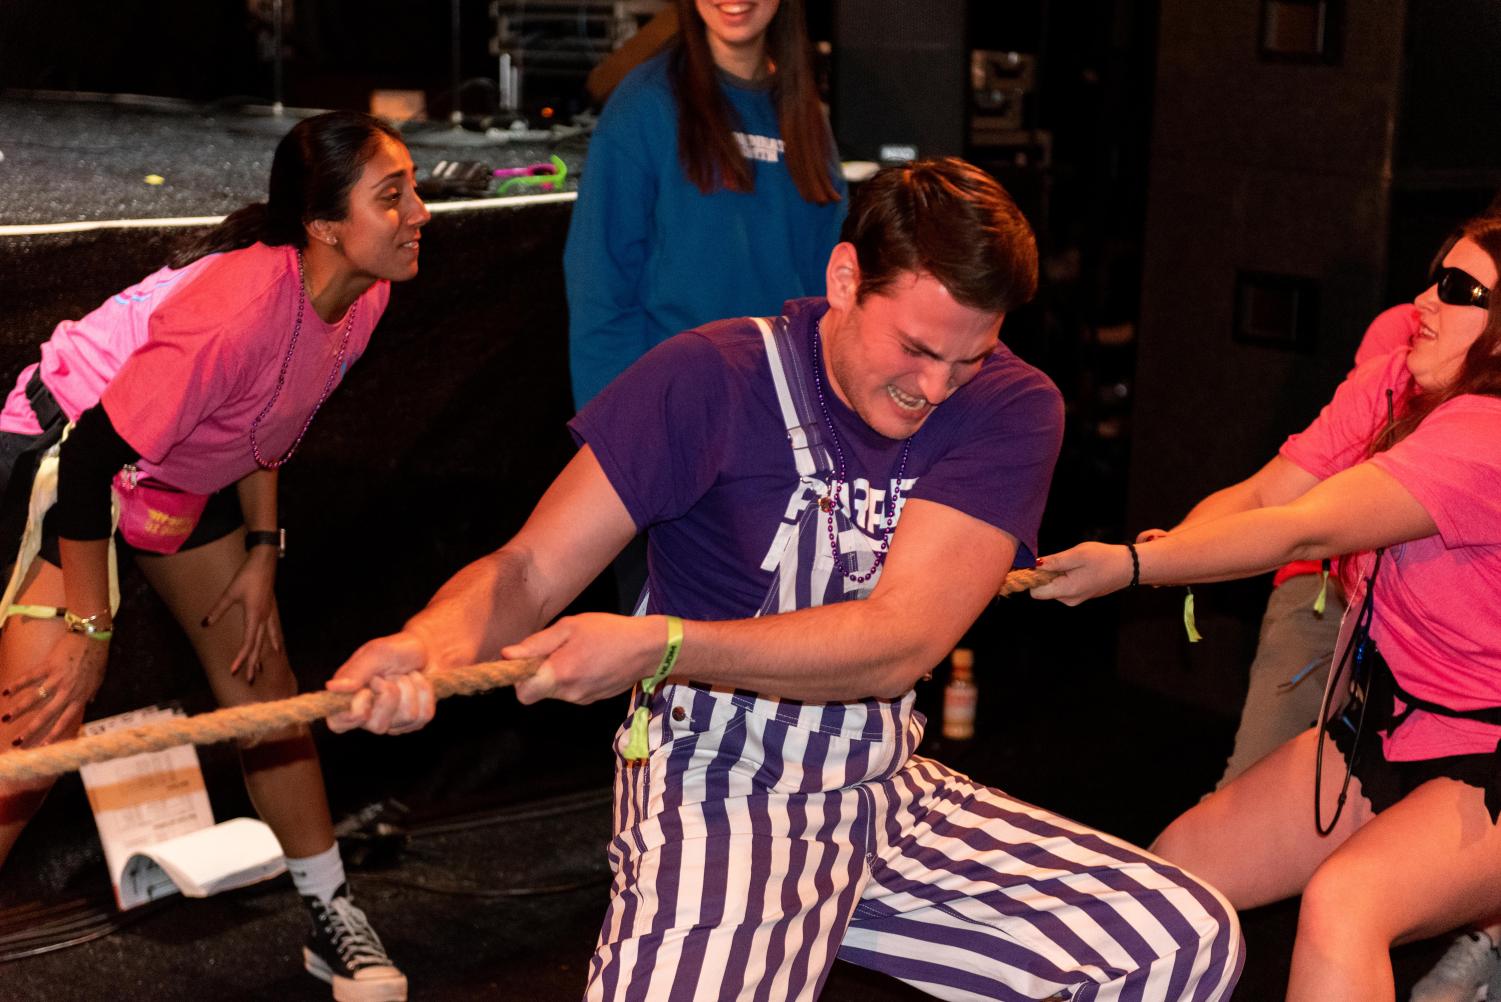 A person in a purple and white overall pulls a rope.